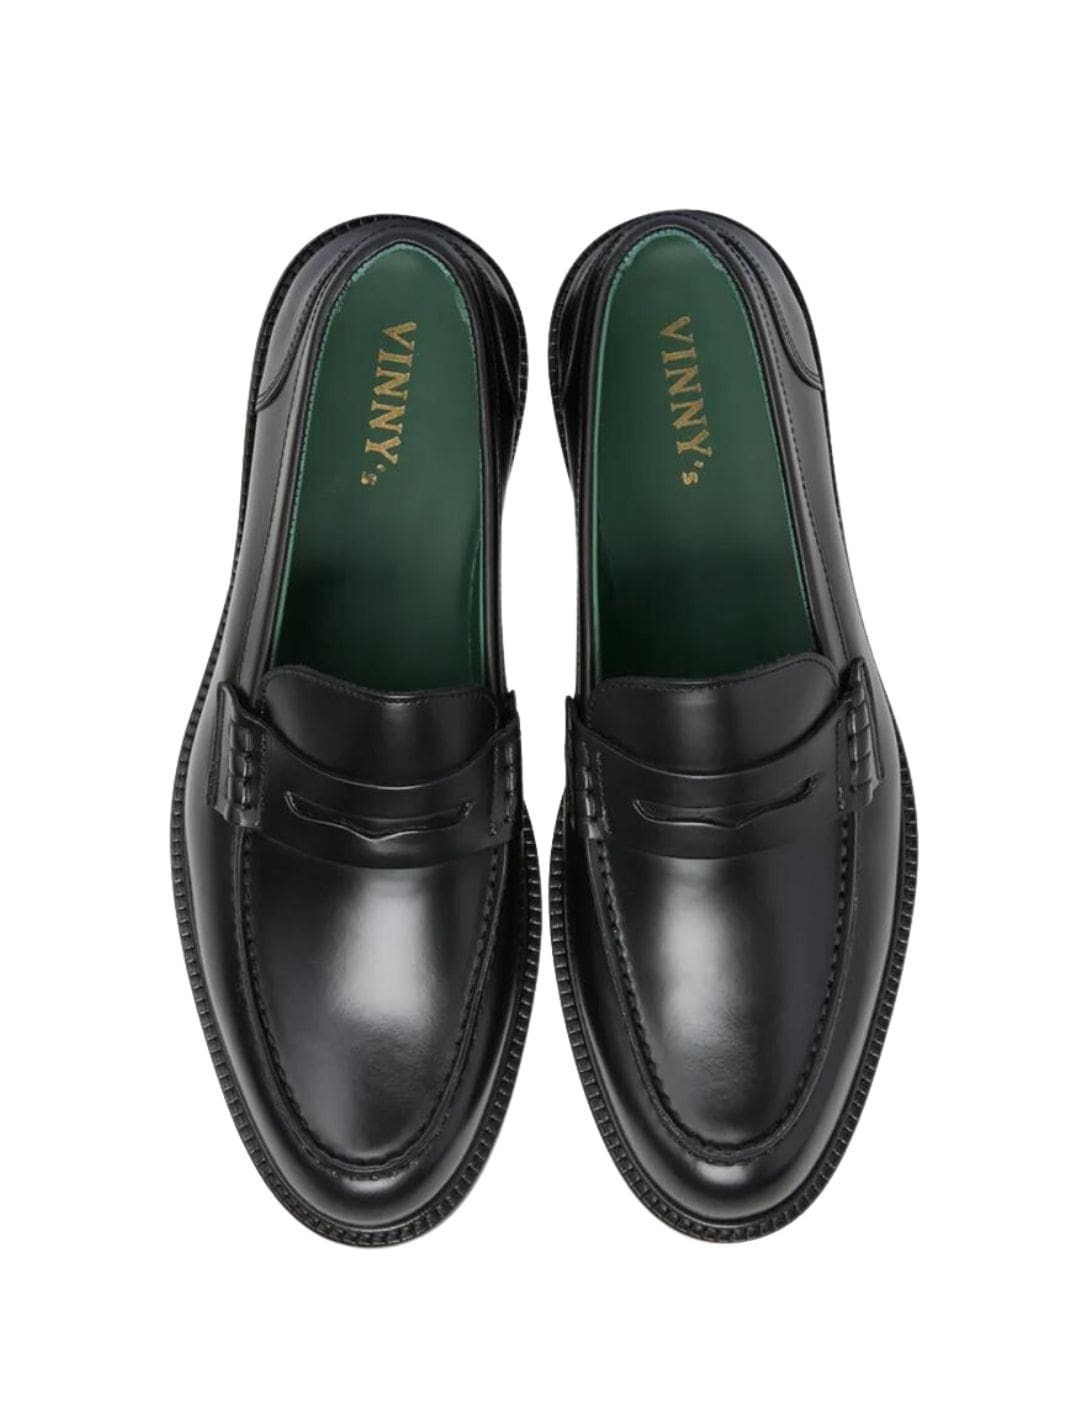 Vinny's Shoes Loafers | Townee Penny Polido Leather Black